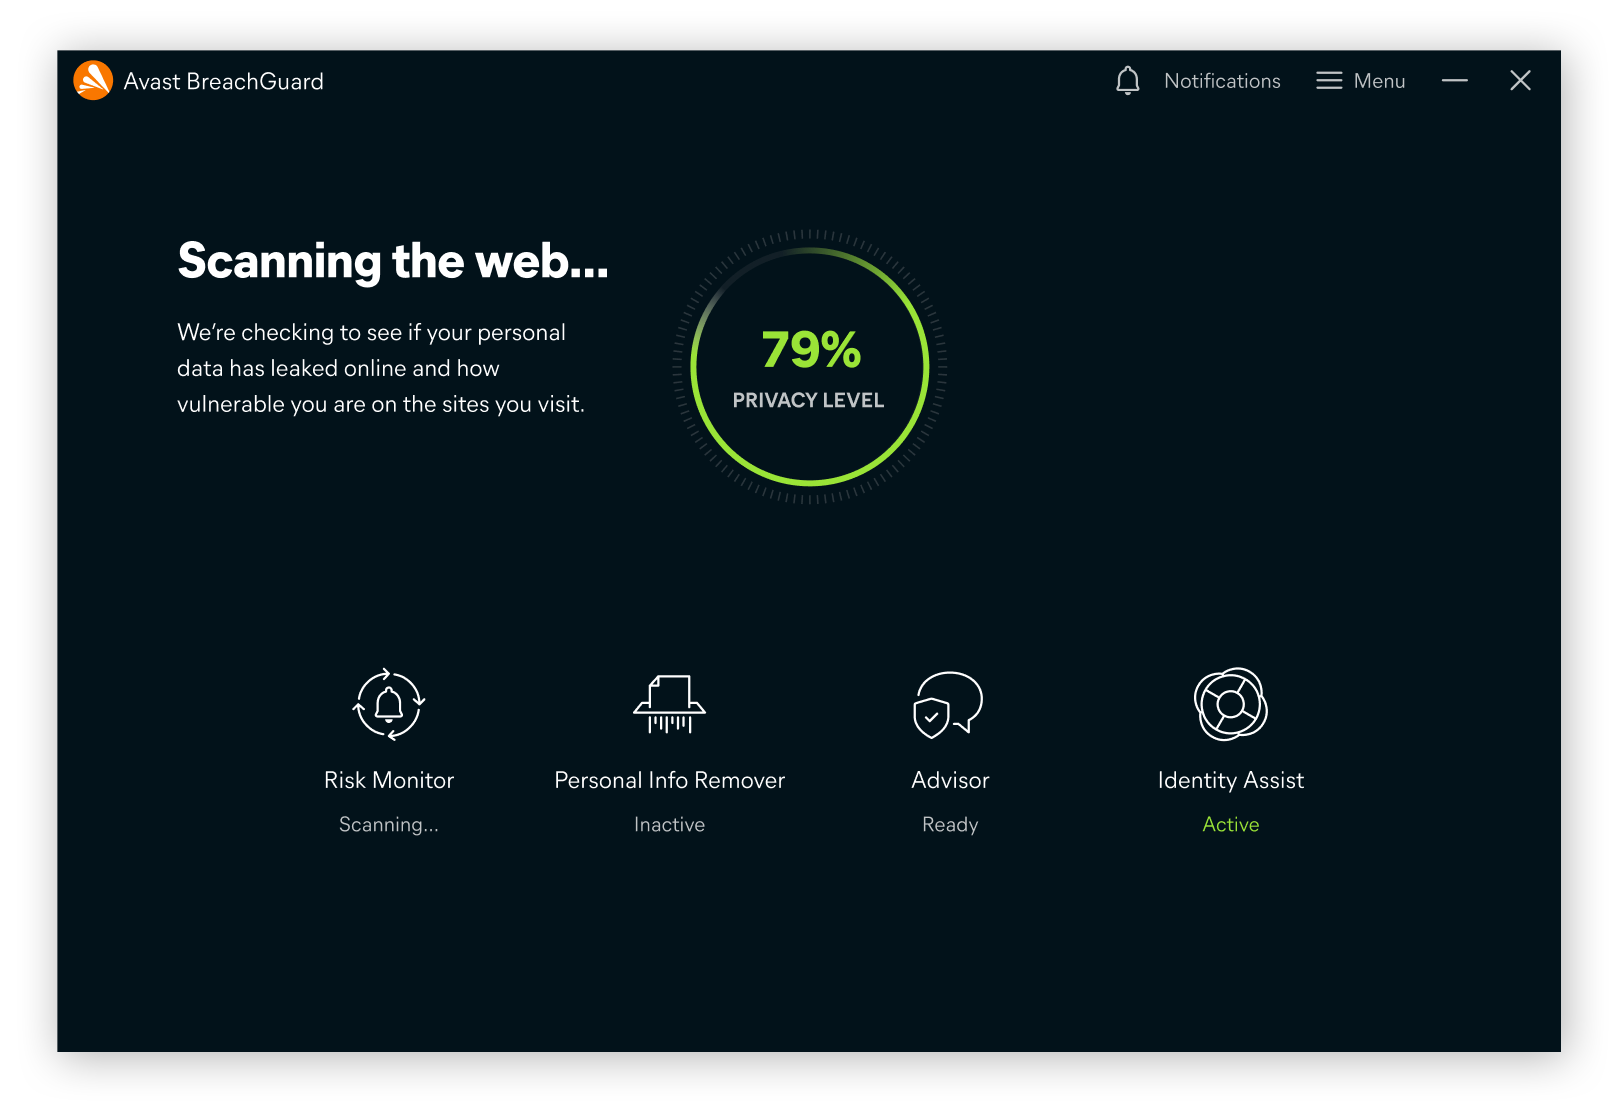  Avast BreachGuard will scan the web to see if your personal data has been exposed.